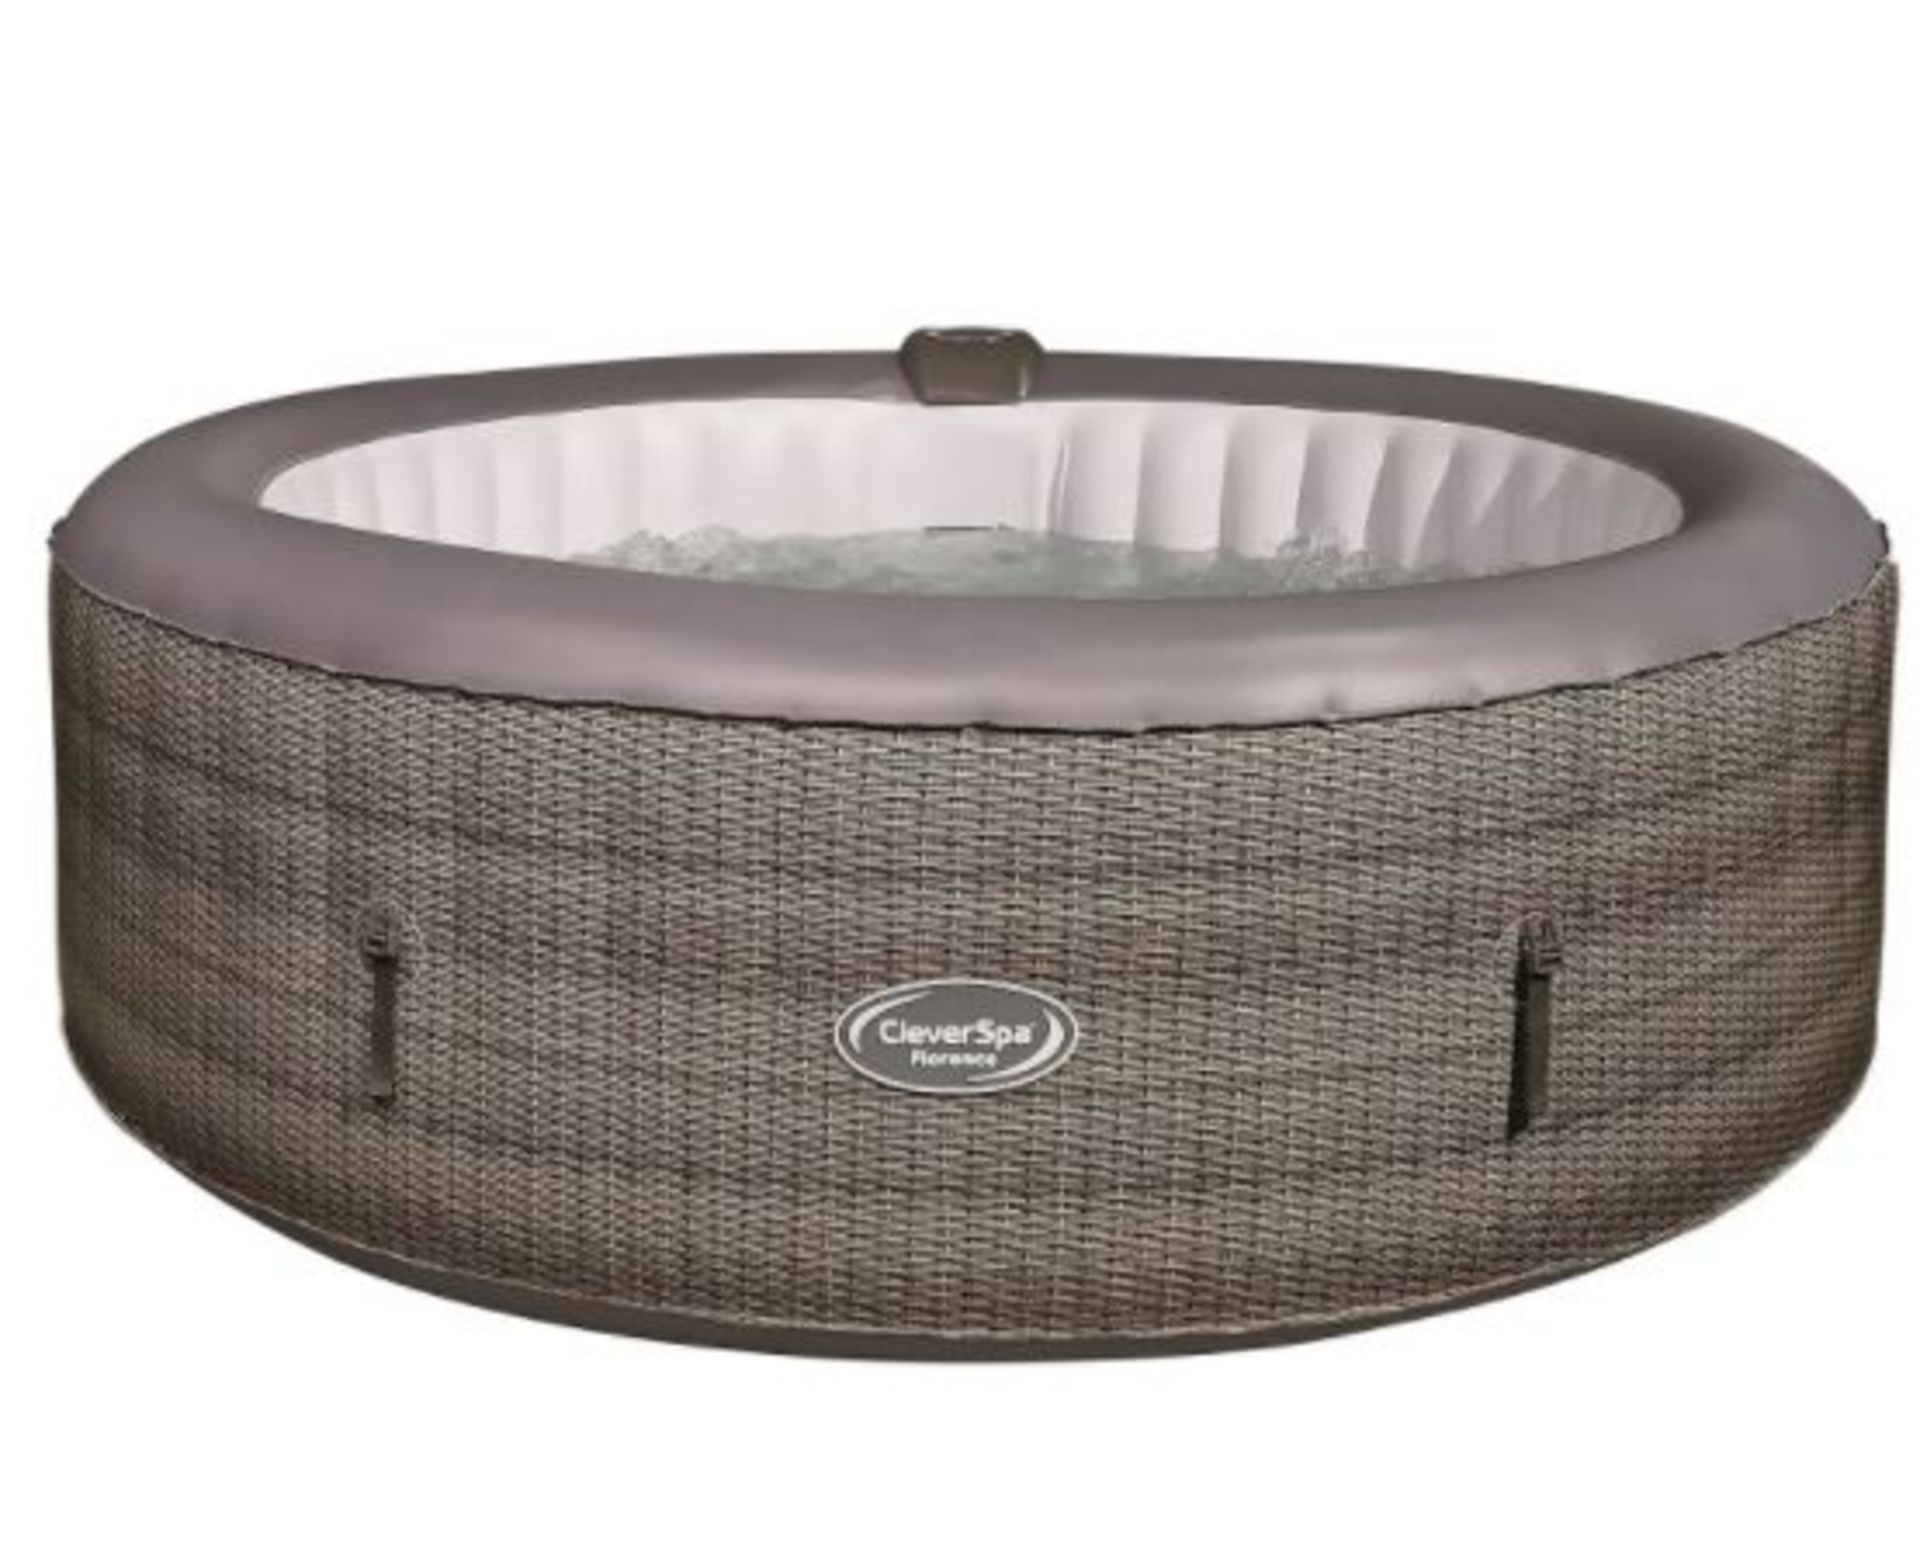 (R6E) 1x Cleverspa Florence 6 Person Hot Tub RRP £560. - Image 2 of 4